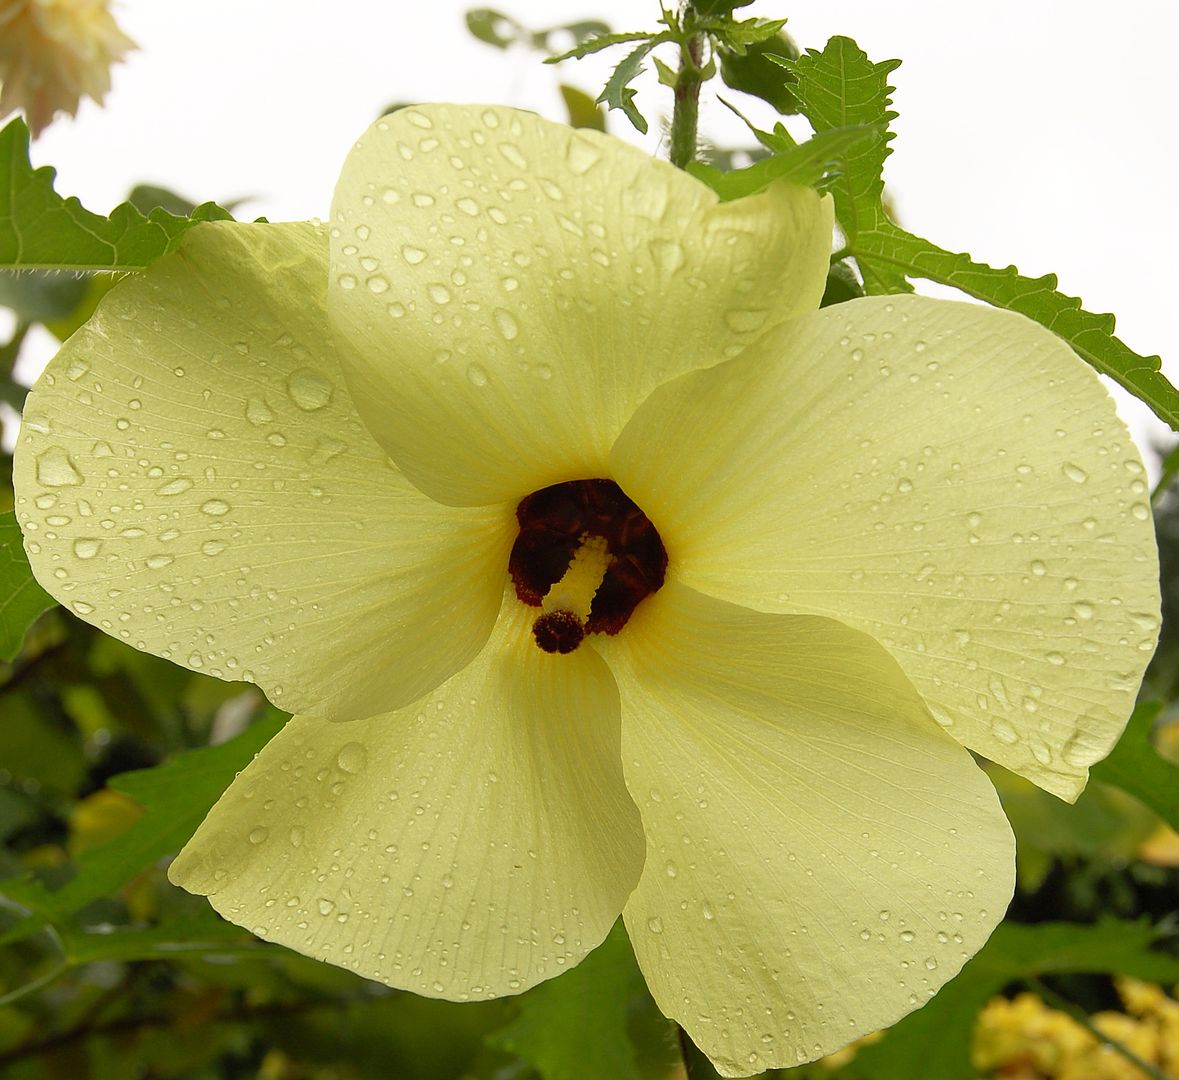 Edible Hibiscus is a large ornamental okra with dinner-plate-sized, sulfur yellow flowers with dark eyes.